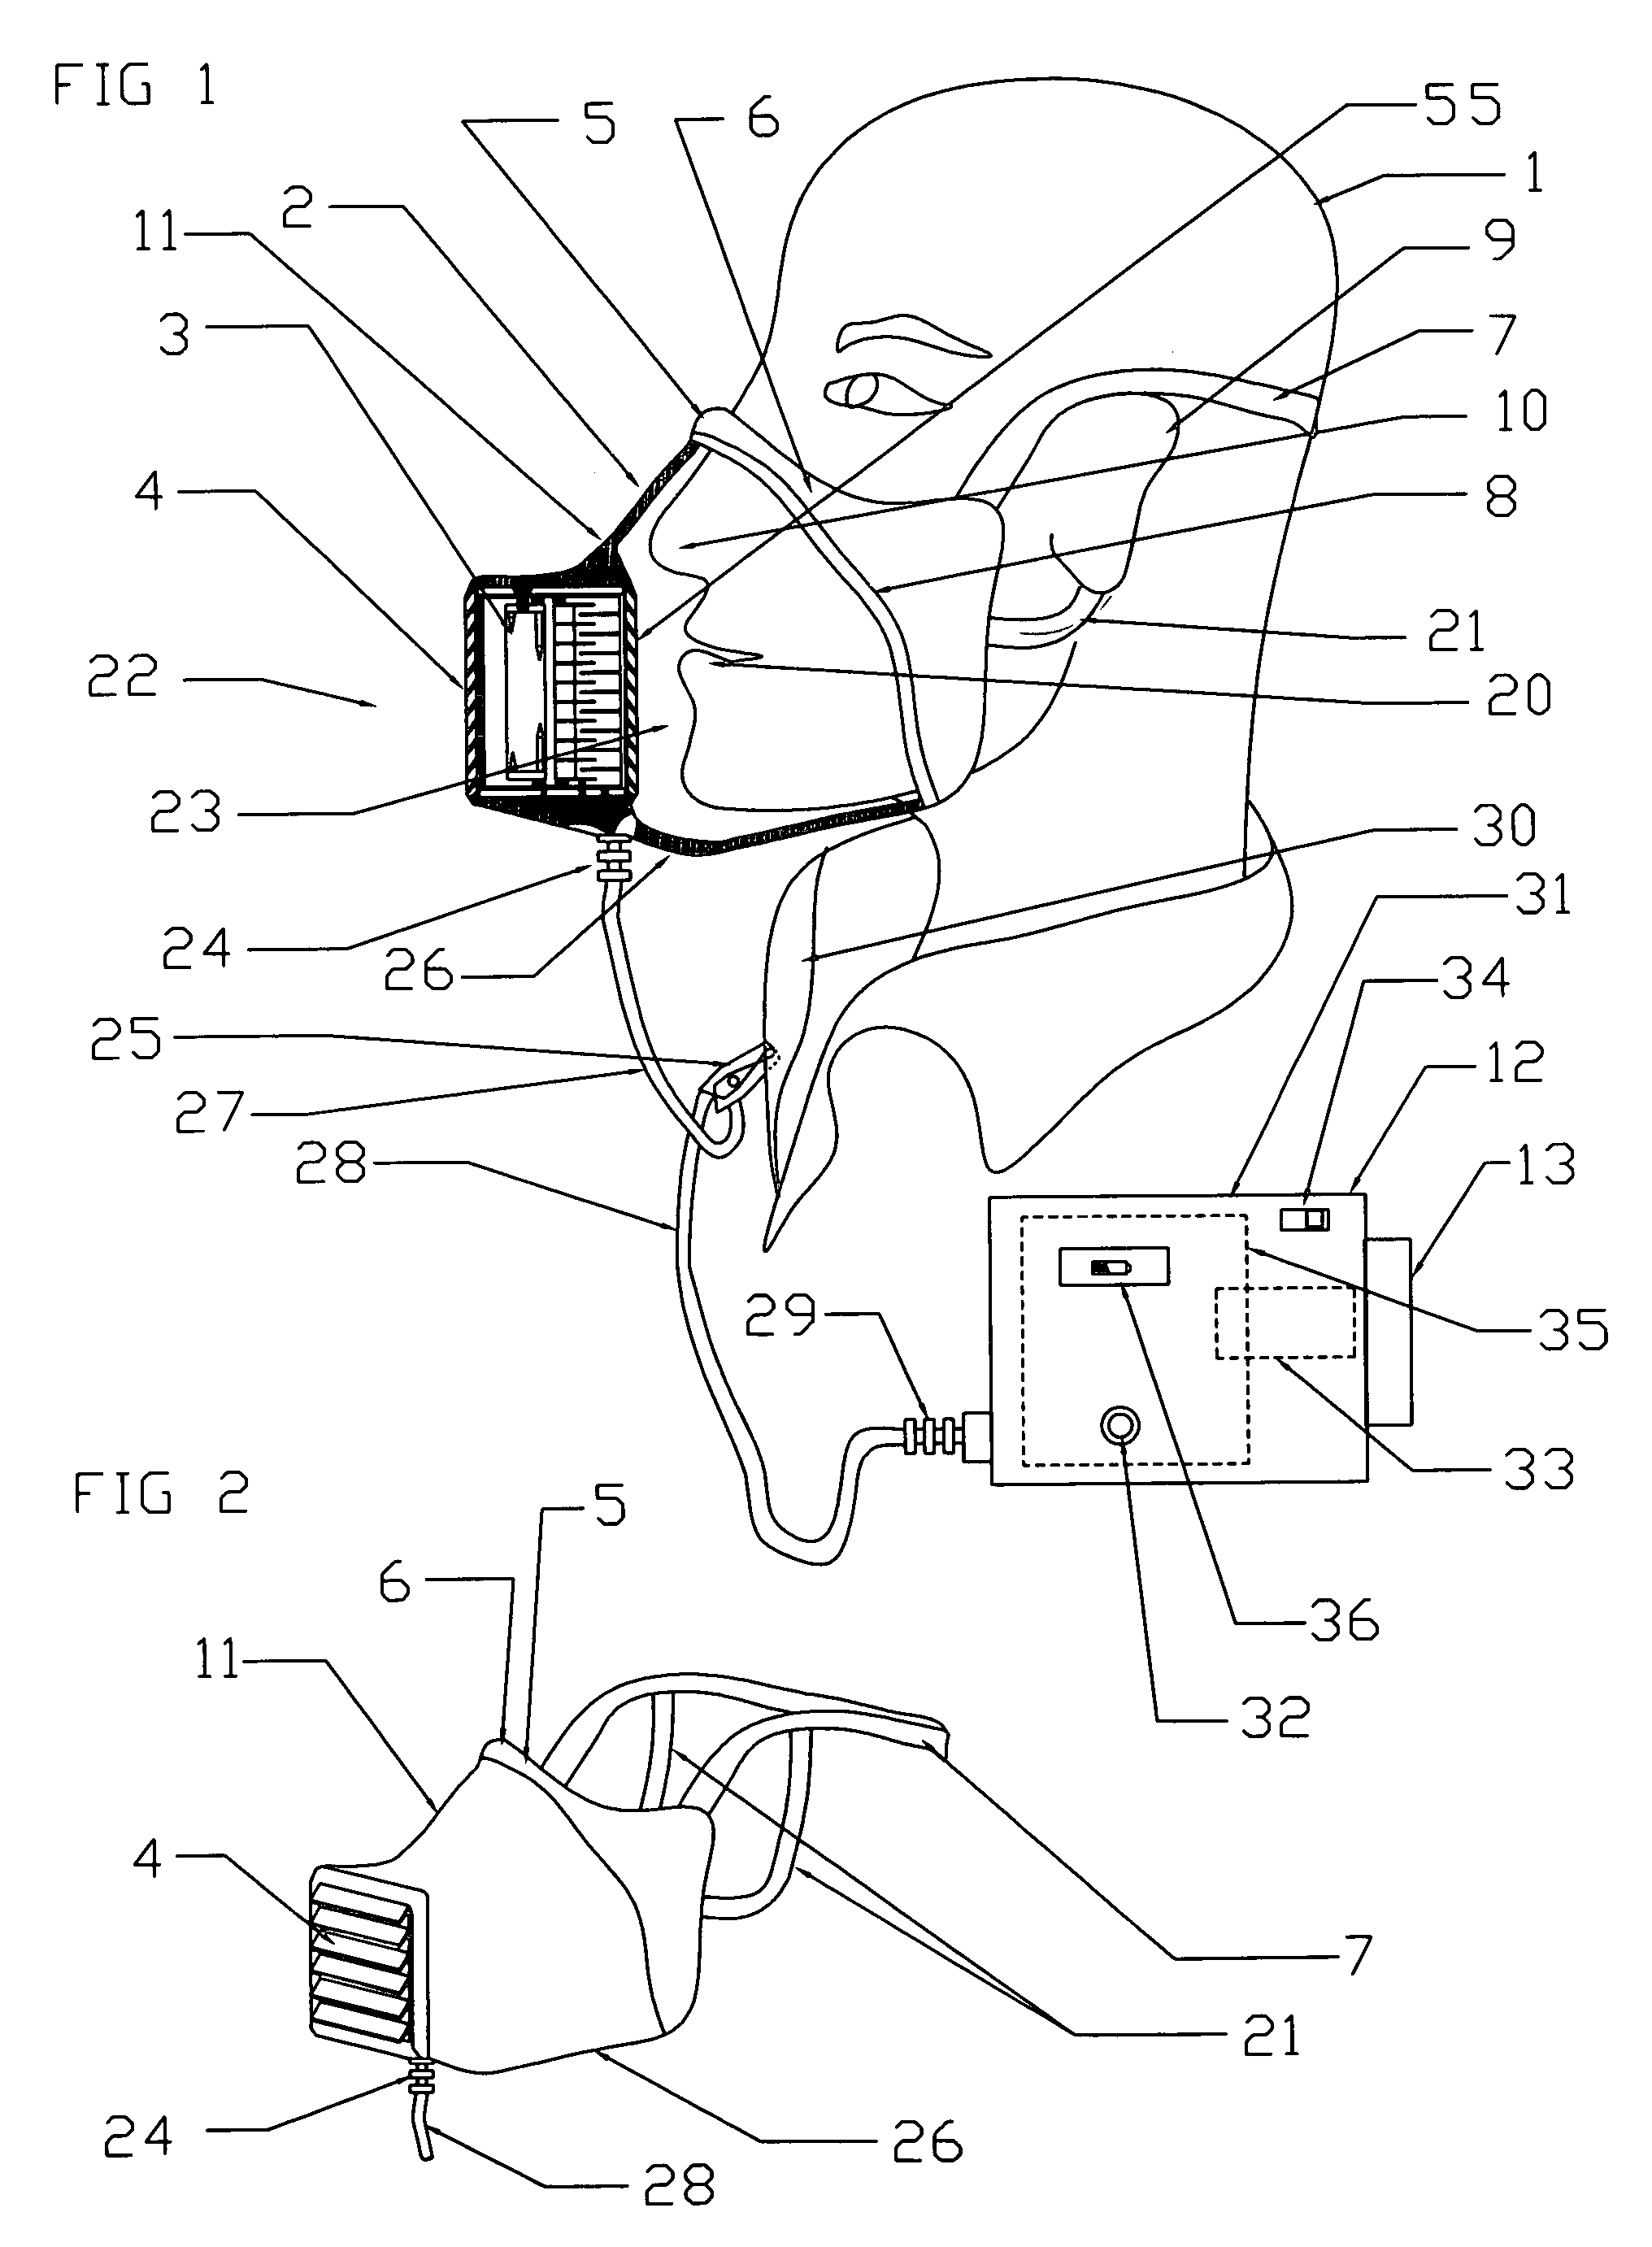 Electronic human breath filtration device